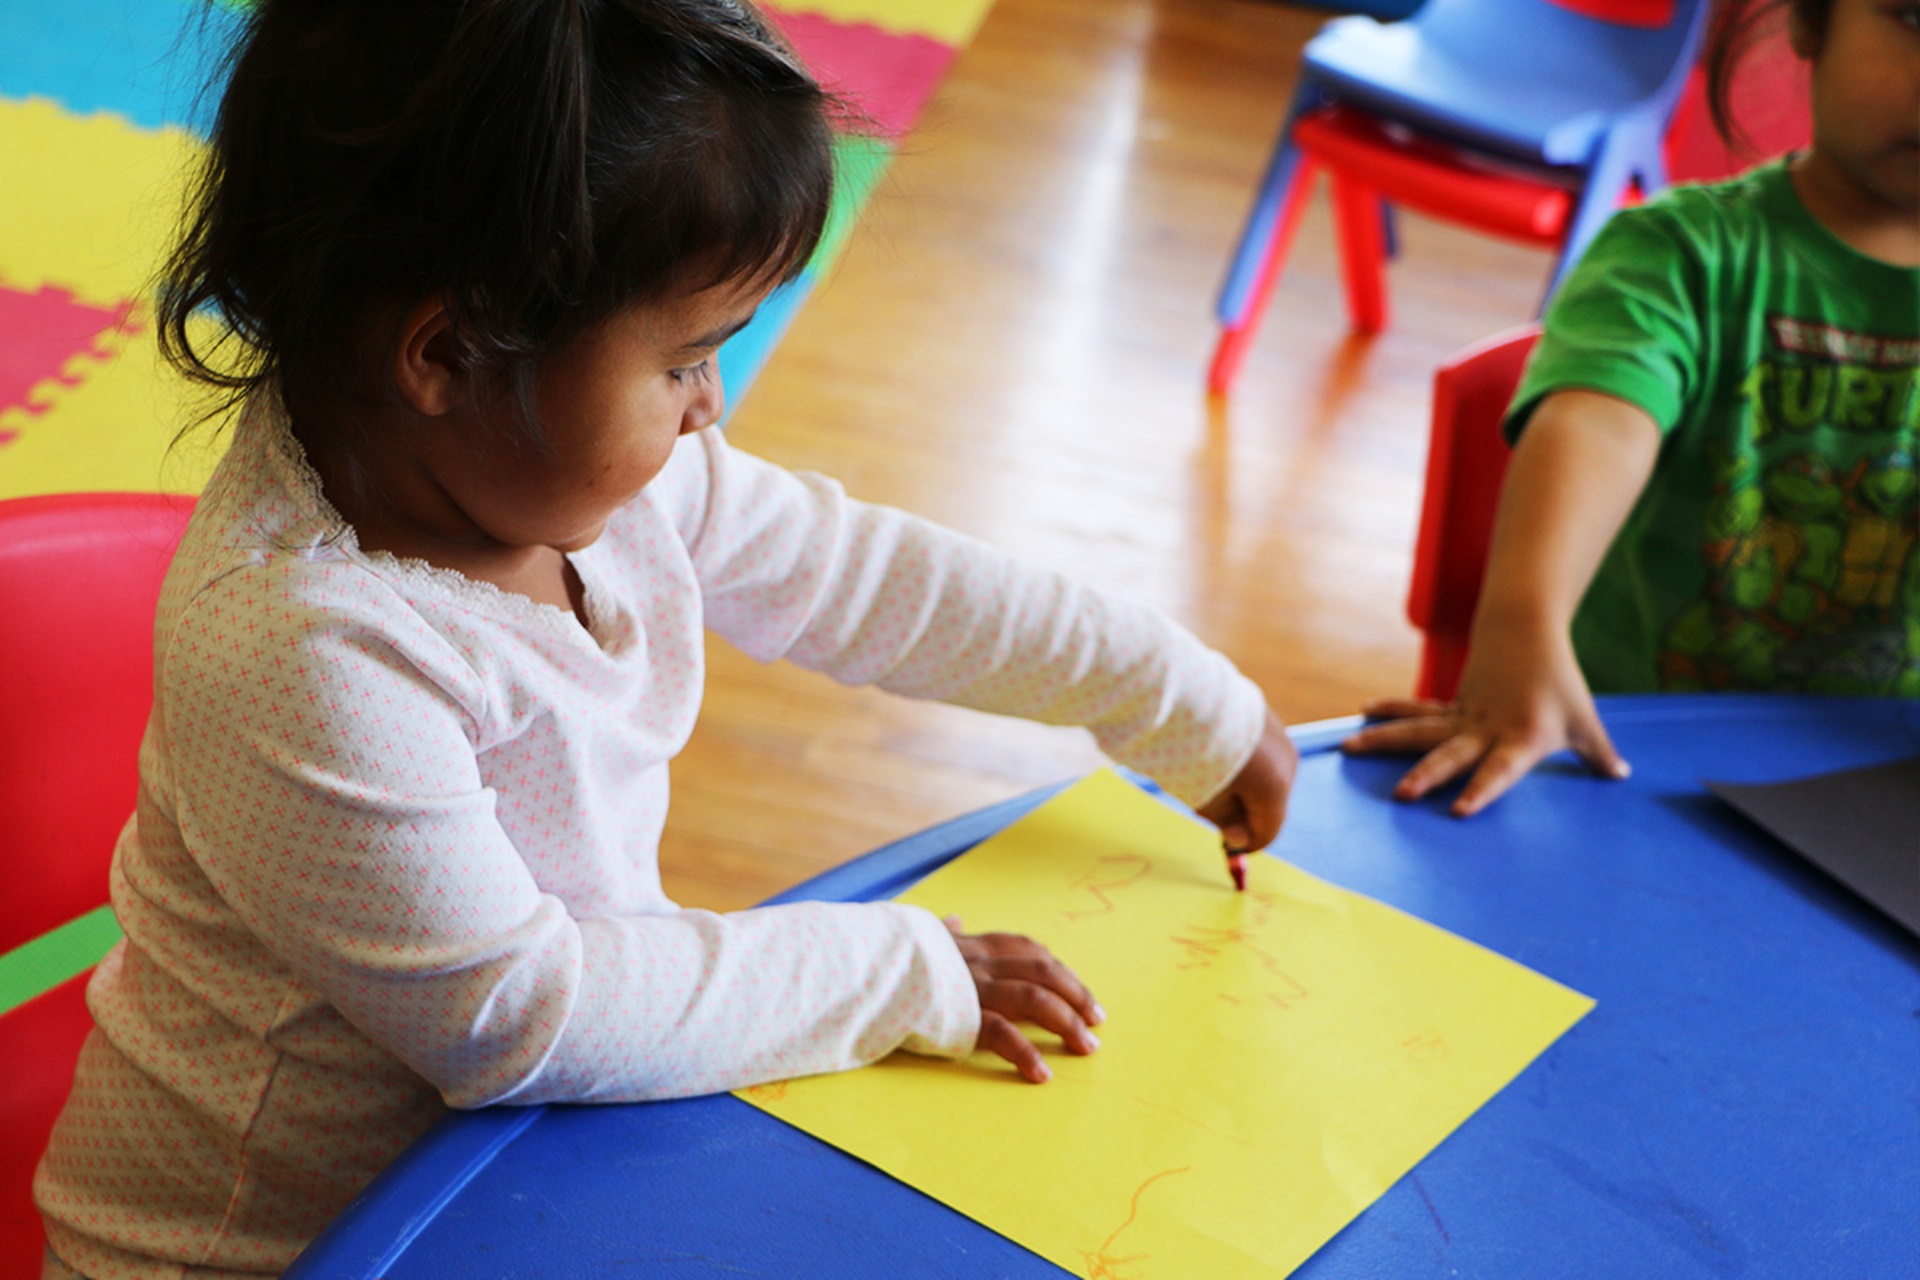 Lakota Immersion Childcare enrolls children as young as age 16 months and up to five years old.